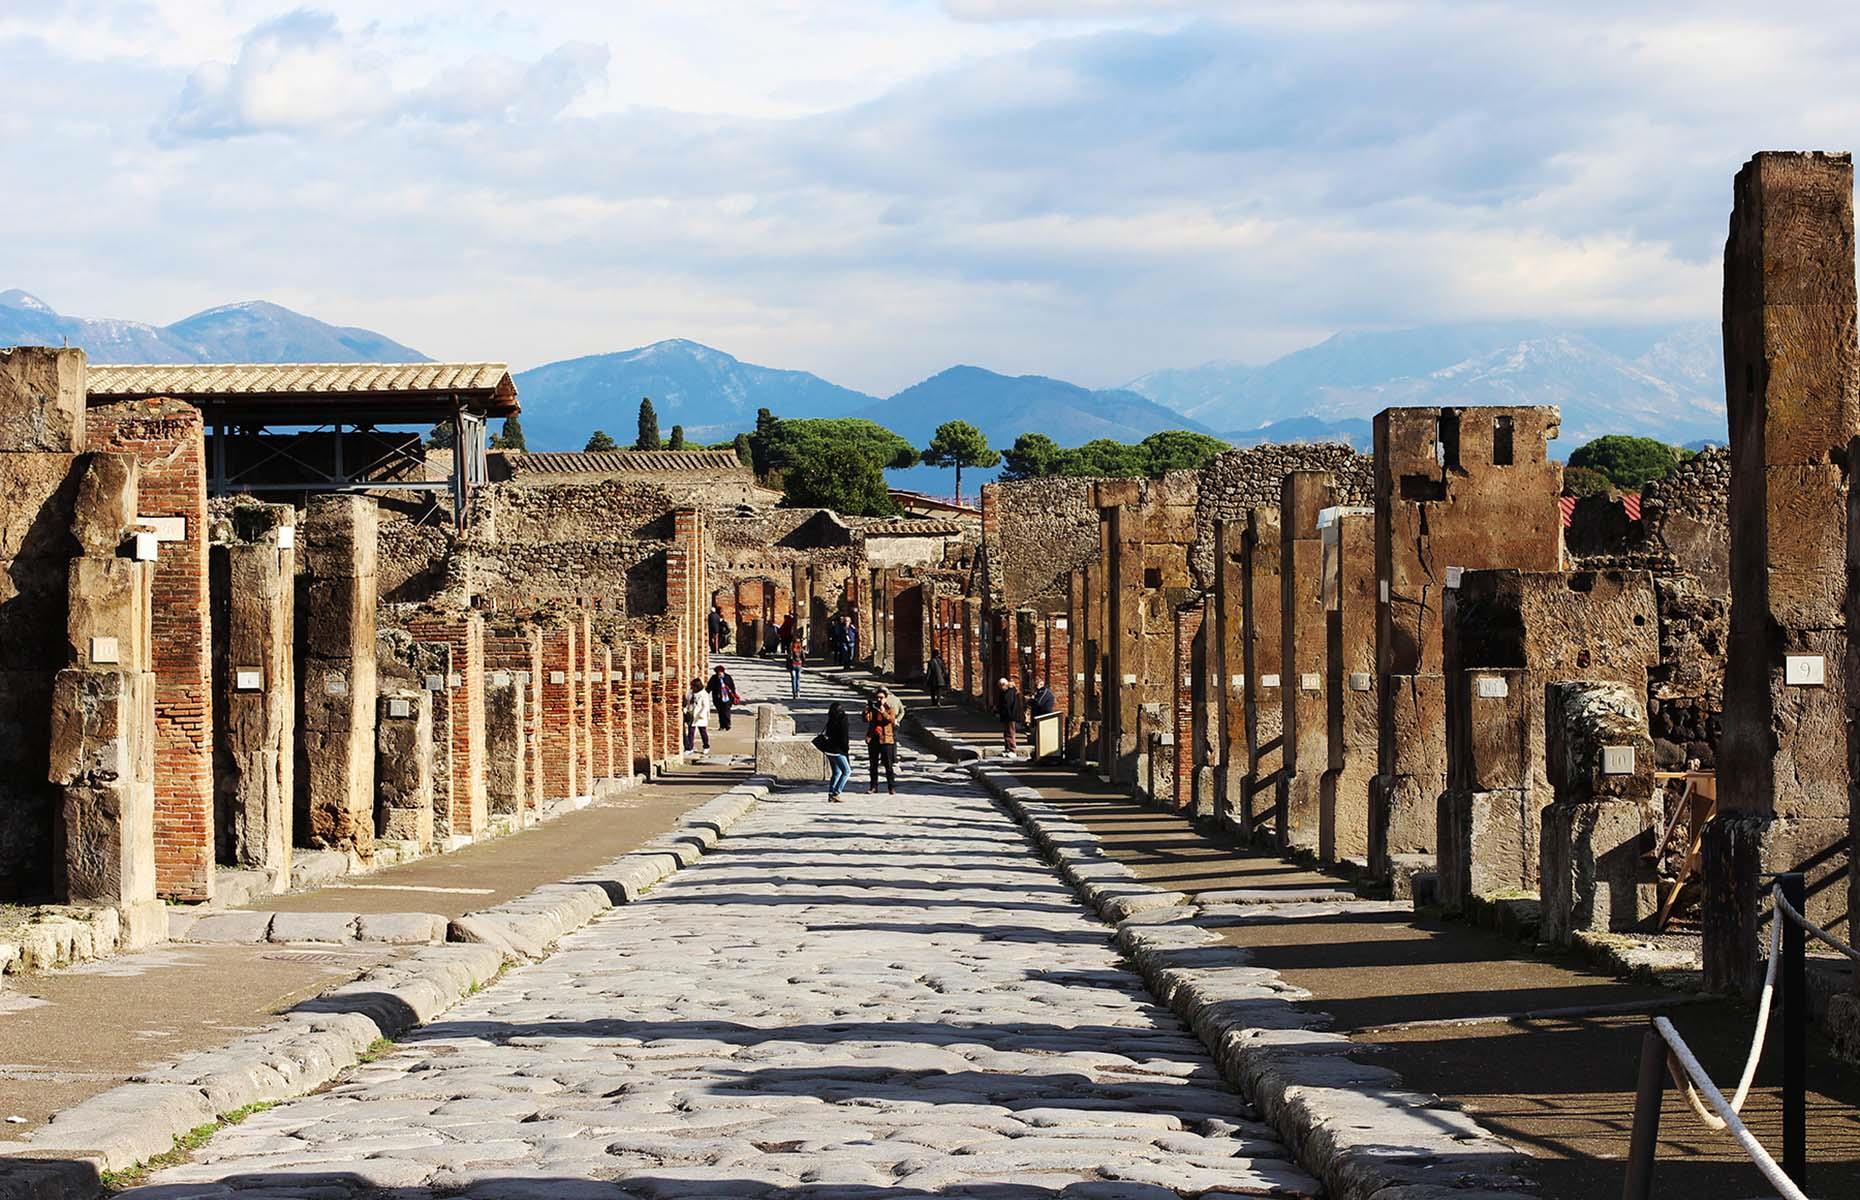 <p>The world had seen the cultural value of Pompeii’s ancient ruins for centuries by the time it was inscribed on the UNESCO World Heritage Site in 1997, along with nearby Pompeii and the ruins of Villa Oplontis in the modern-day town of Torre Annunziata. Not only did that afford an extra level of protection to the precious sites, but it also meant that when torrential flooding hit in 2010 and 2014, experts from the international body were on hand to help with restoration.</p>